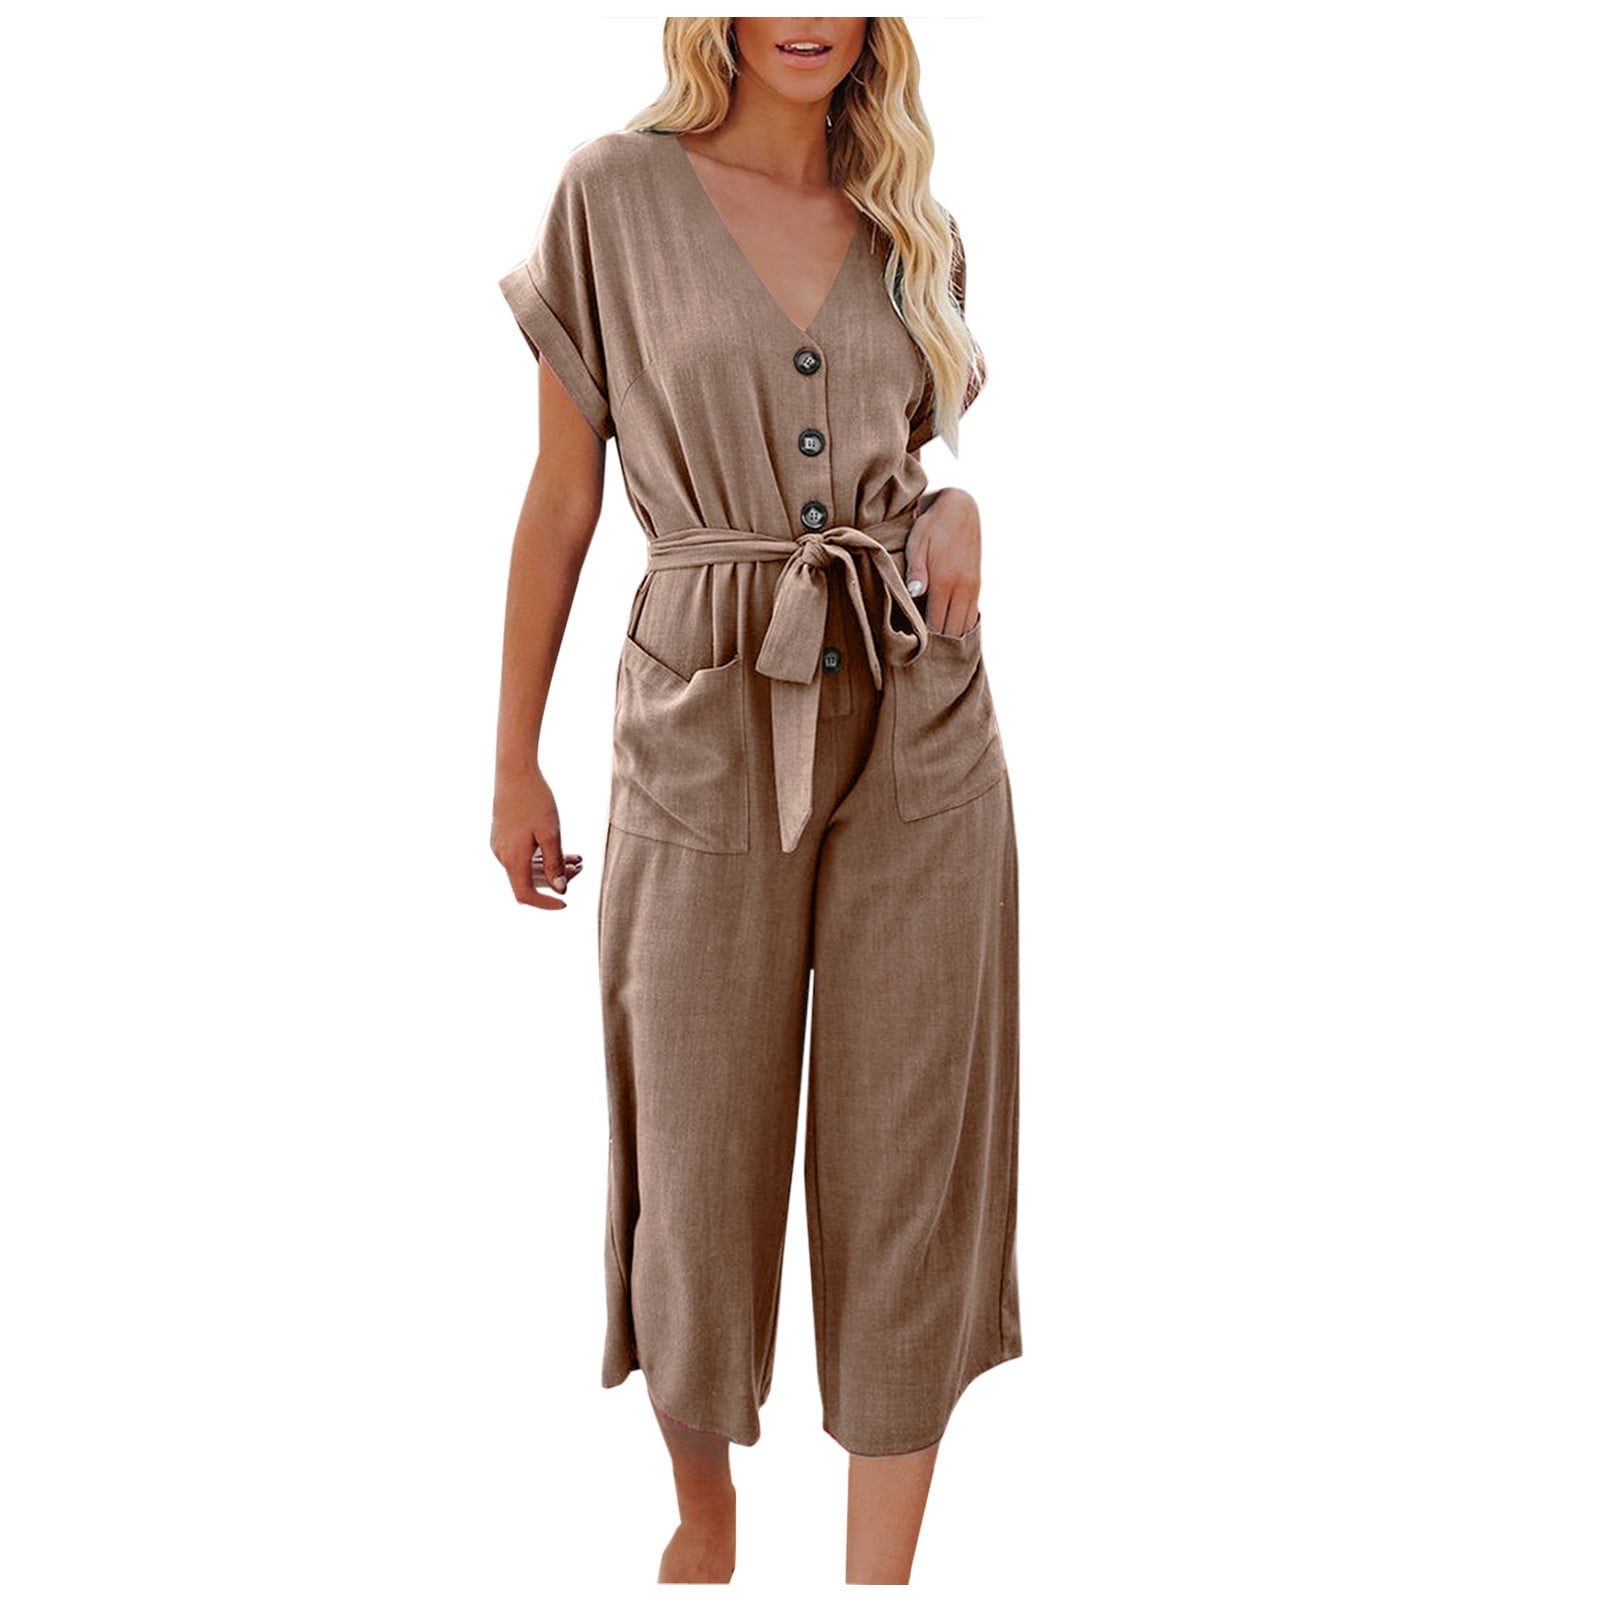 Summer Rompers for Women Long to Short Lightweight Cute Options